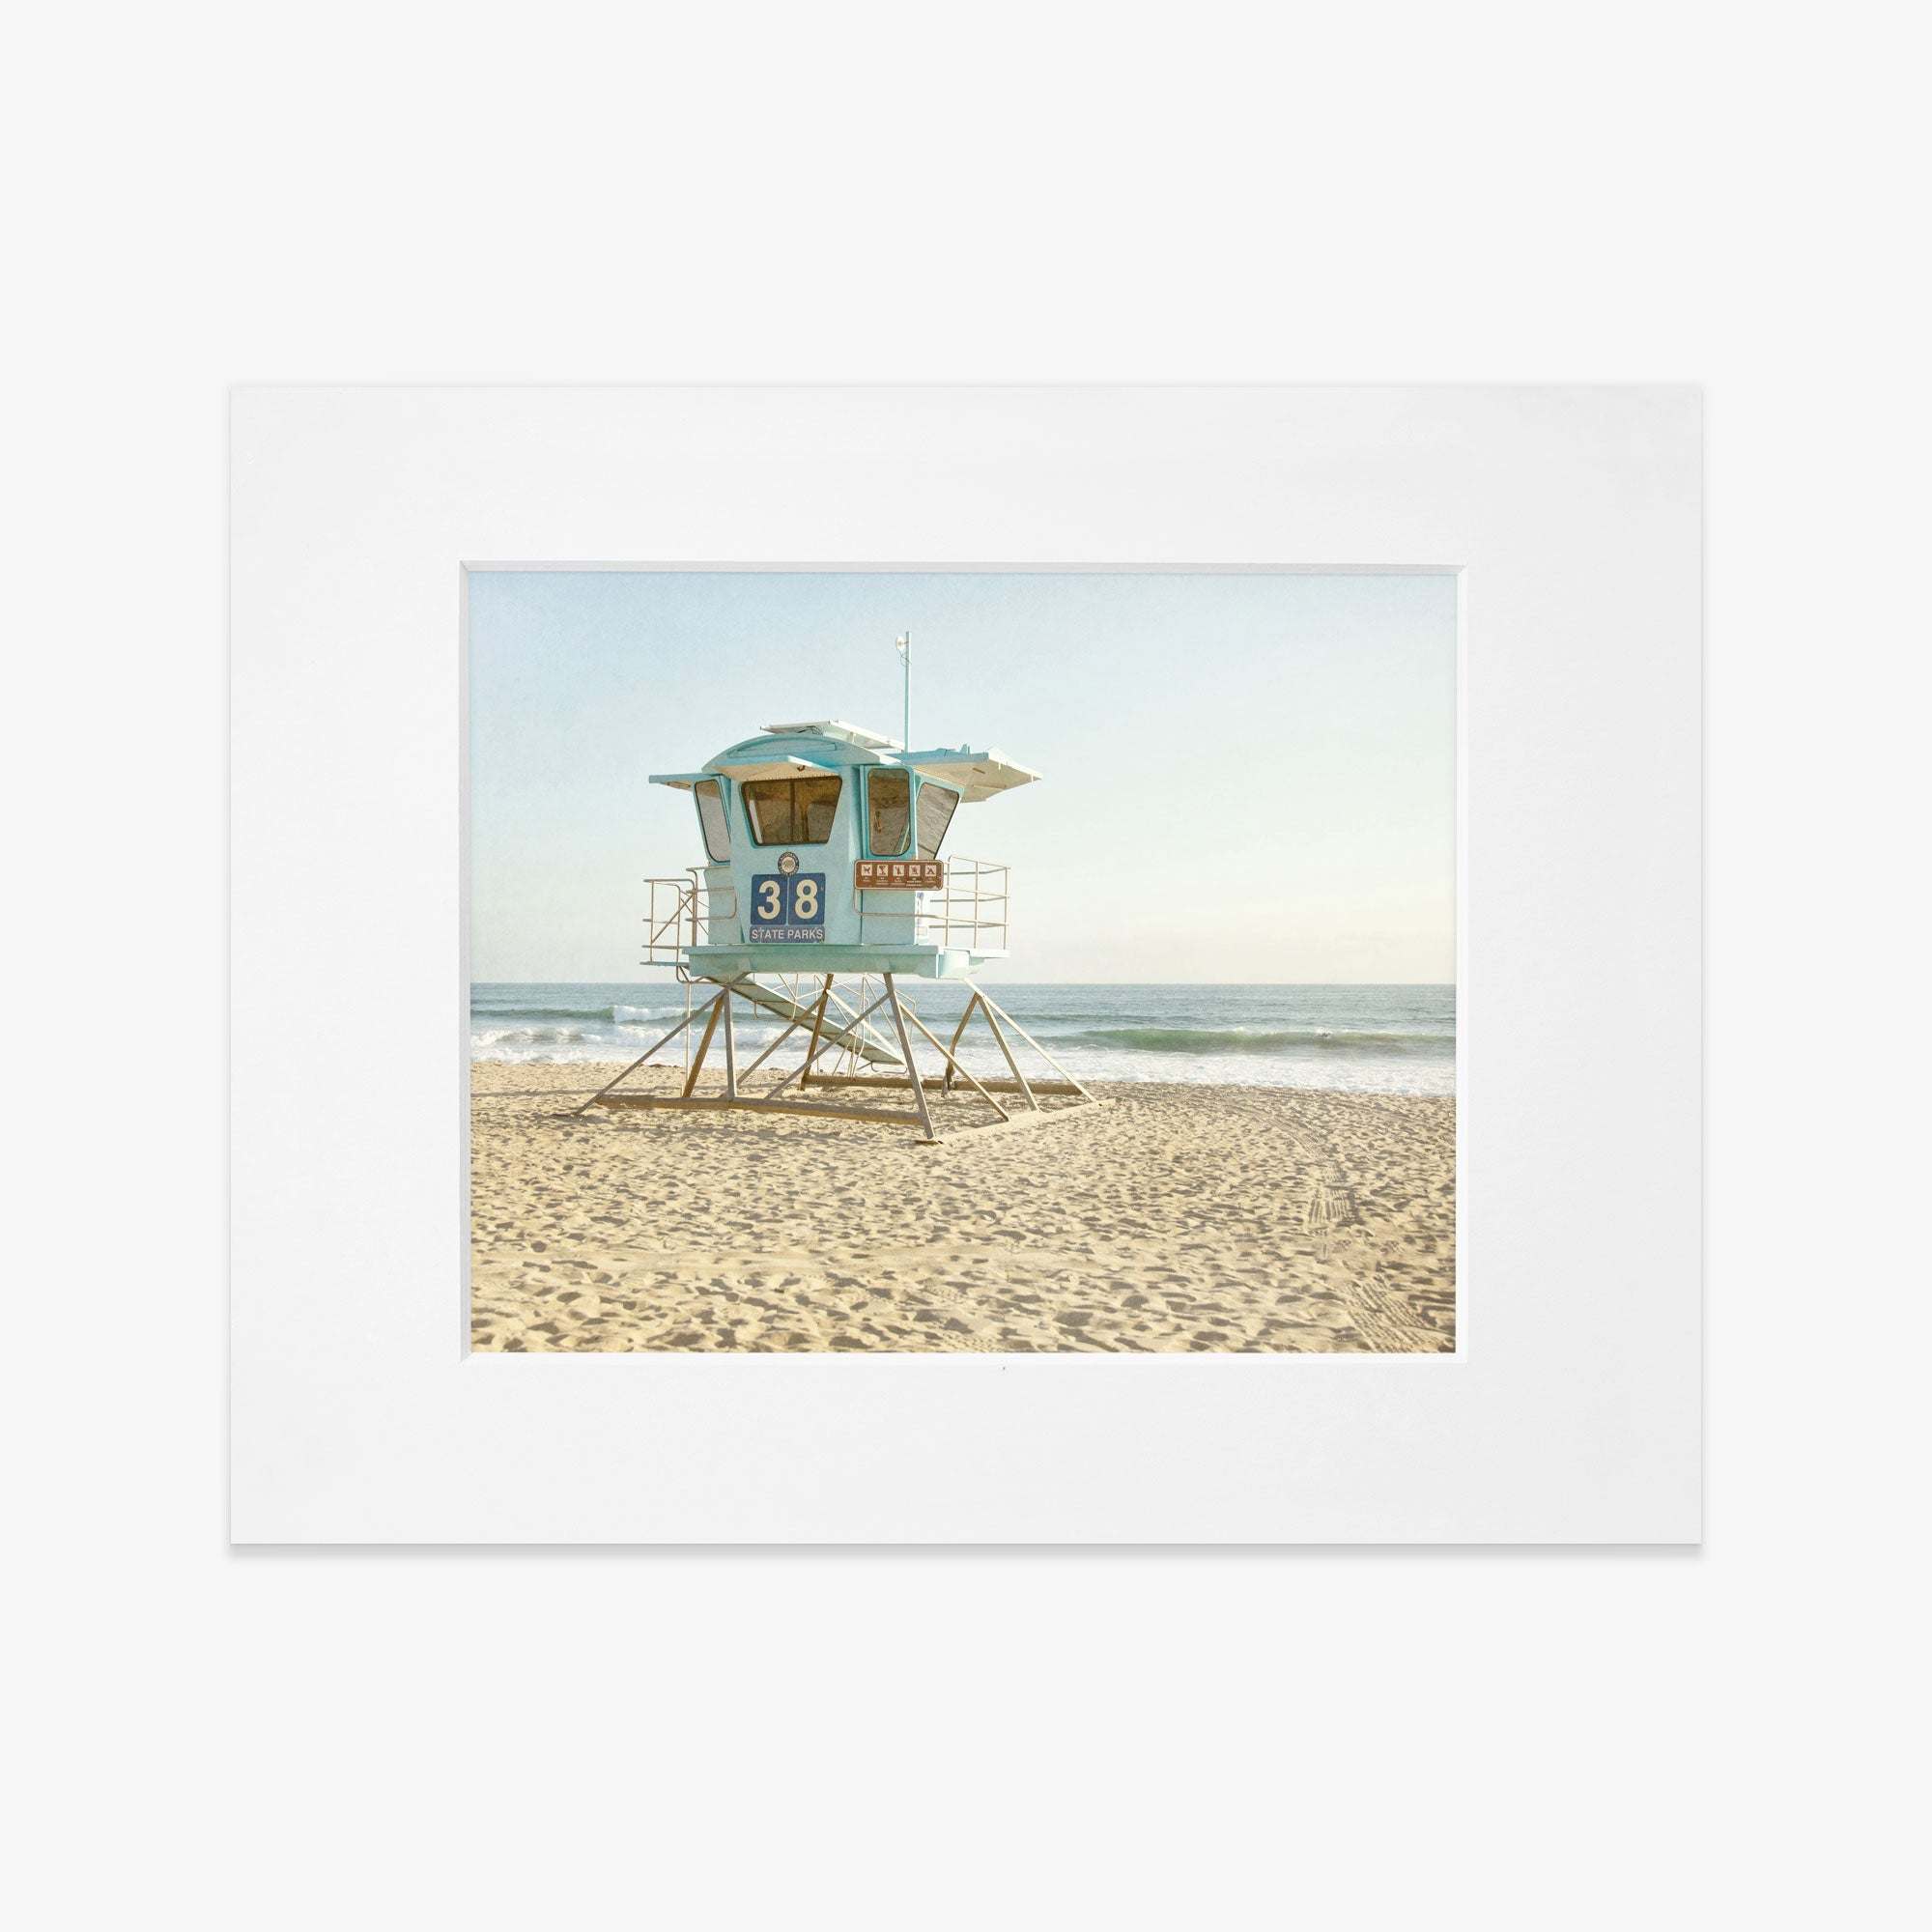 Framed photograph of a vibrant lifeguard tower numbered 38, set on a sandy beach with gentle waves in the background, under a clear blue sky on the California coastline. 
Product Name: Offley Green&#39;s California Coastal Print, &#39;Carlsbad Lifeguard Tower&#39;